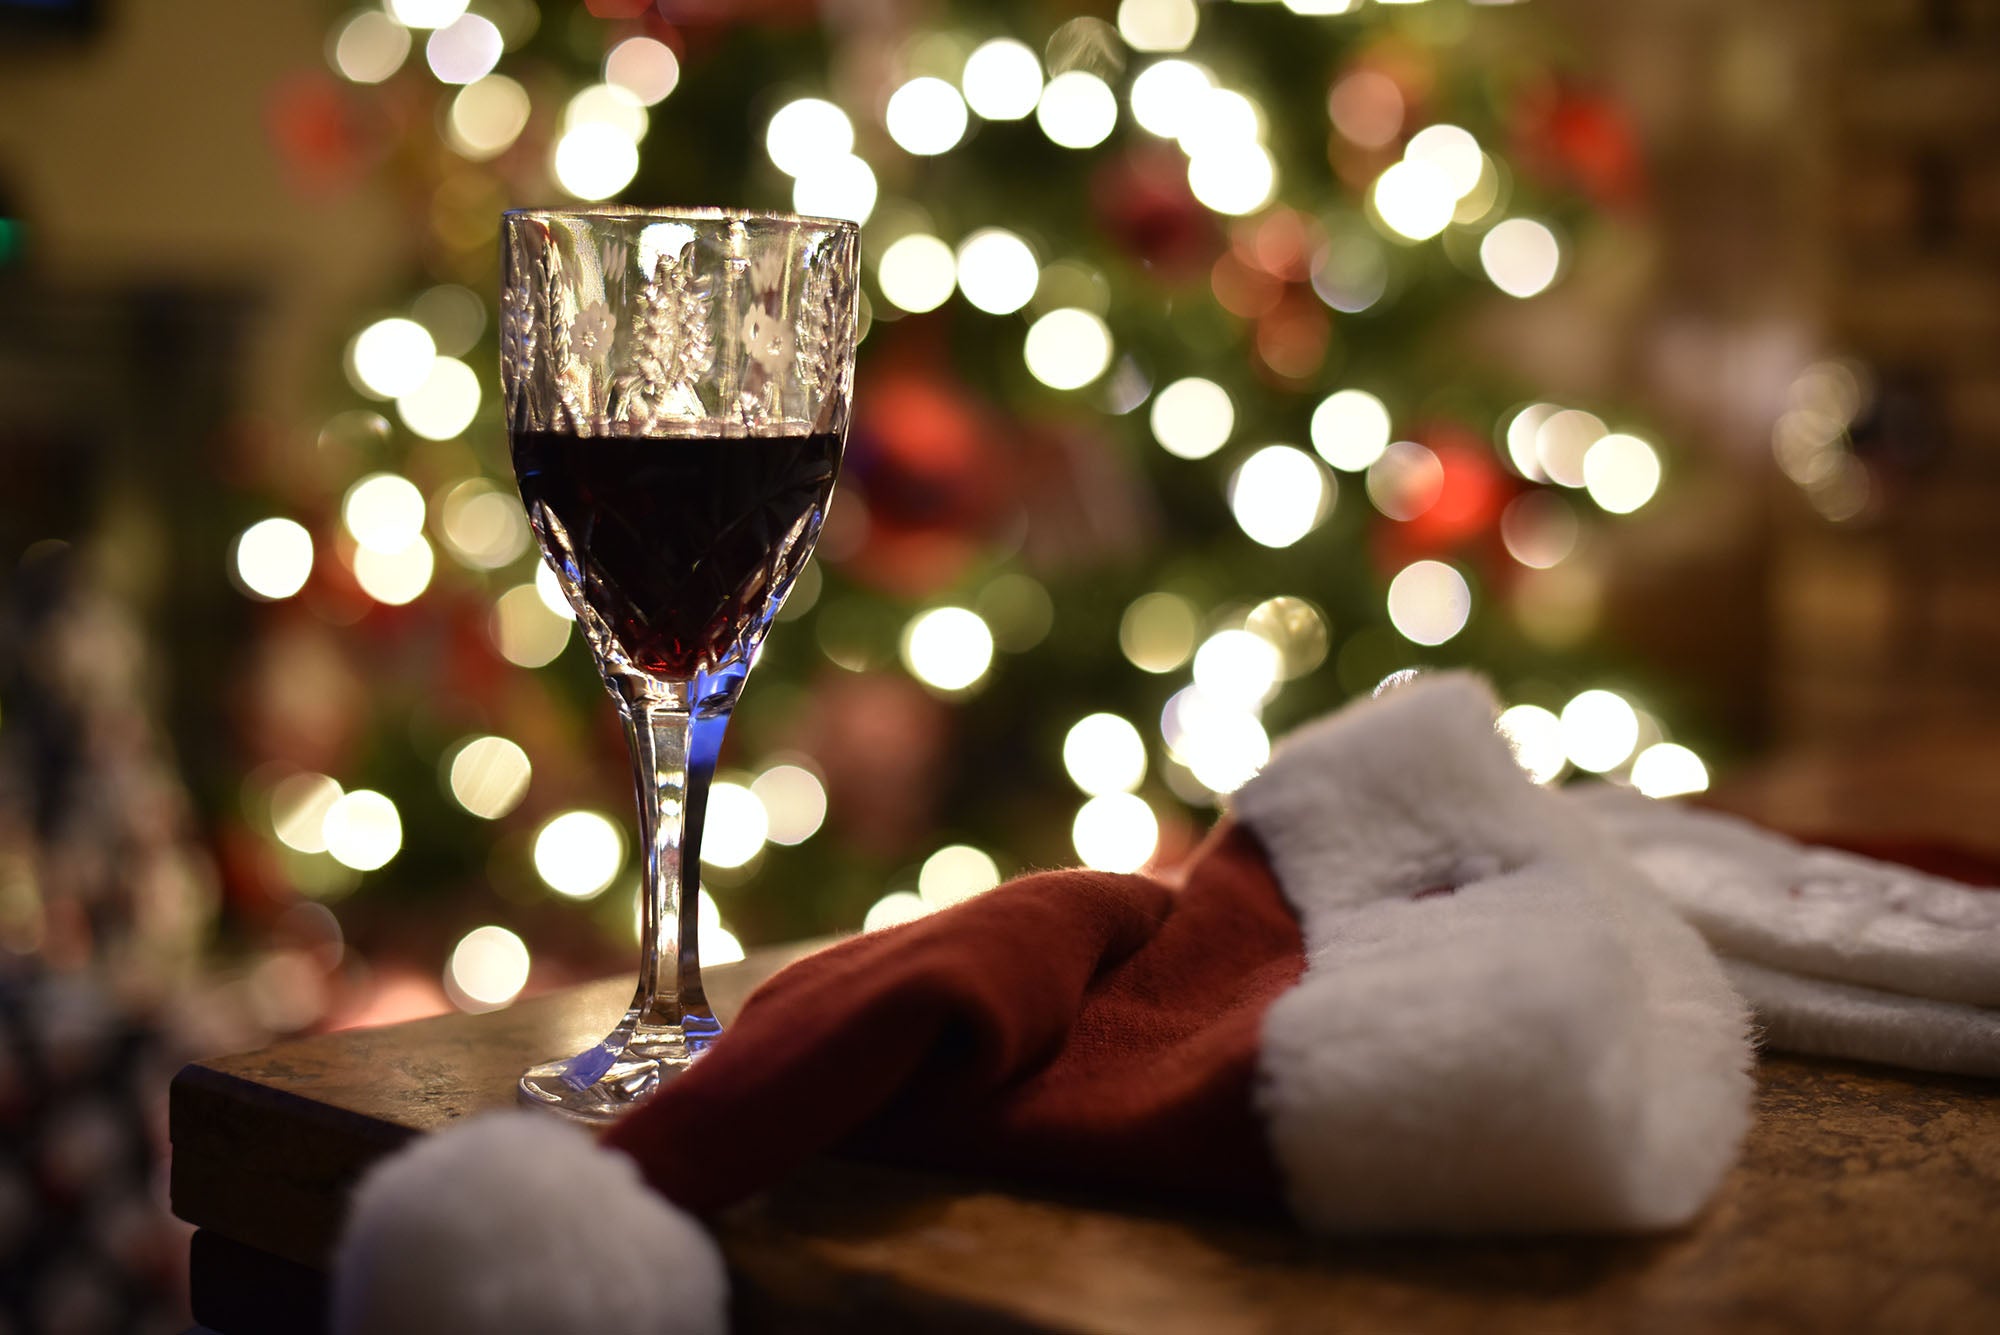 Glass of red wine next to Christmas tree and Santa hat